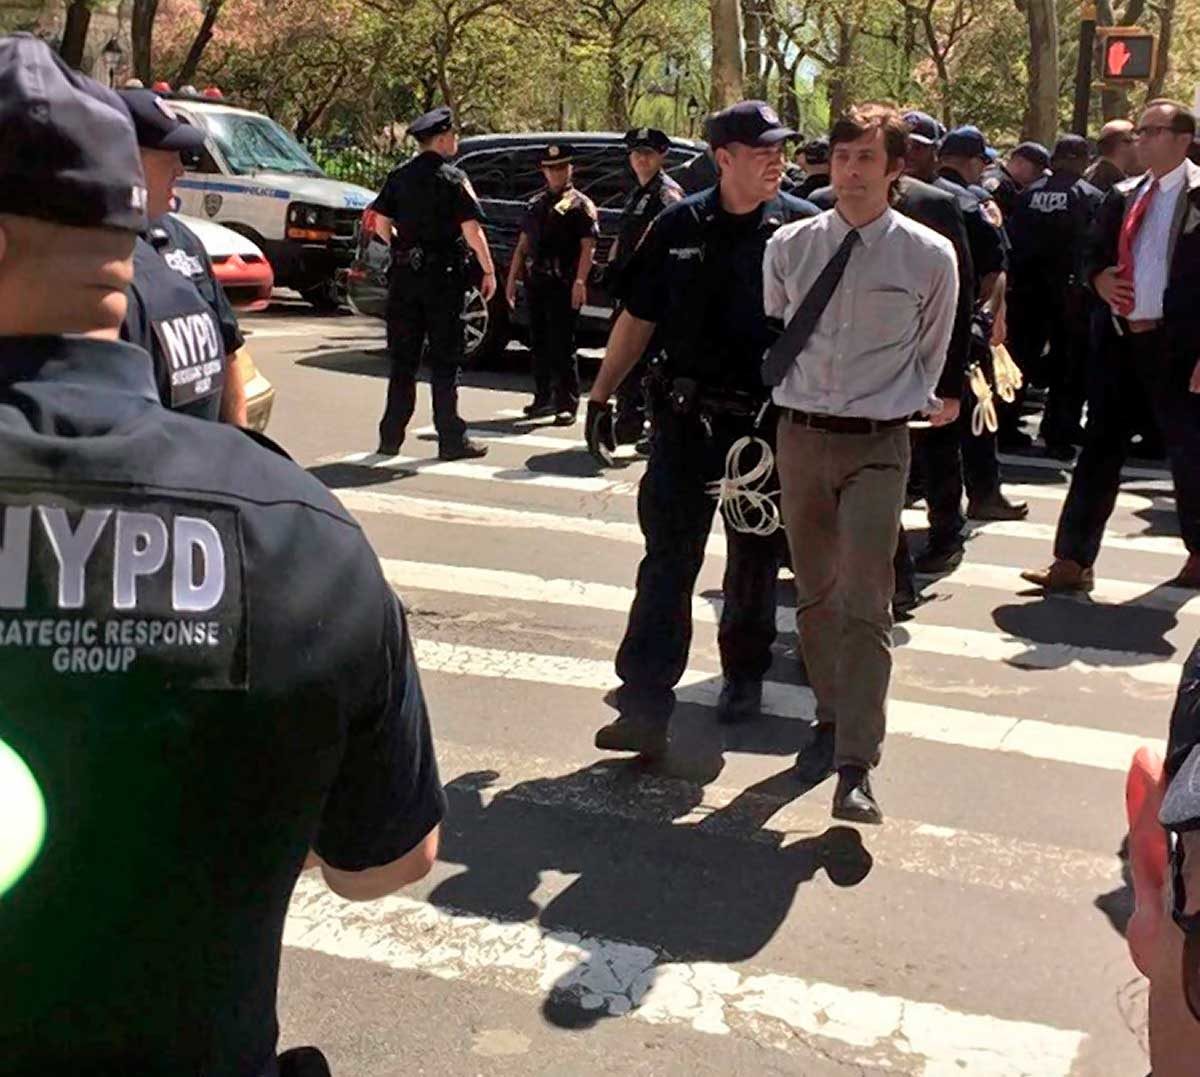 Councilman cuffed! Bklyn Heights pol busted during protest demanding city opioid study